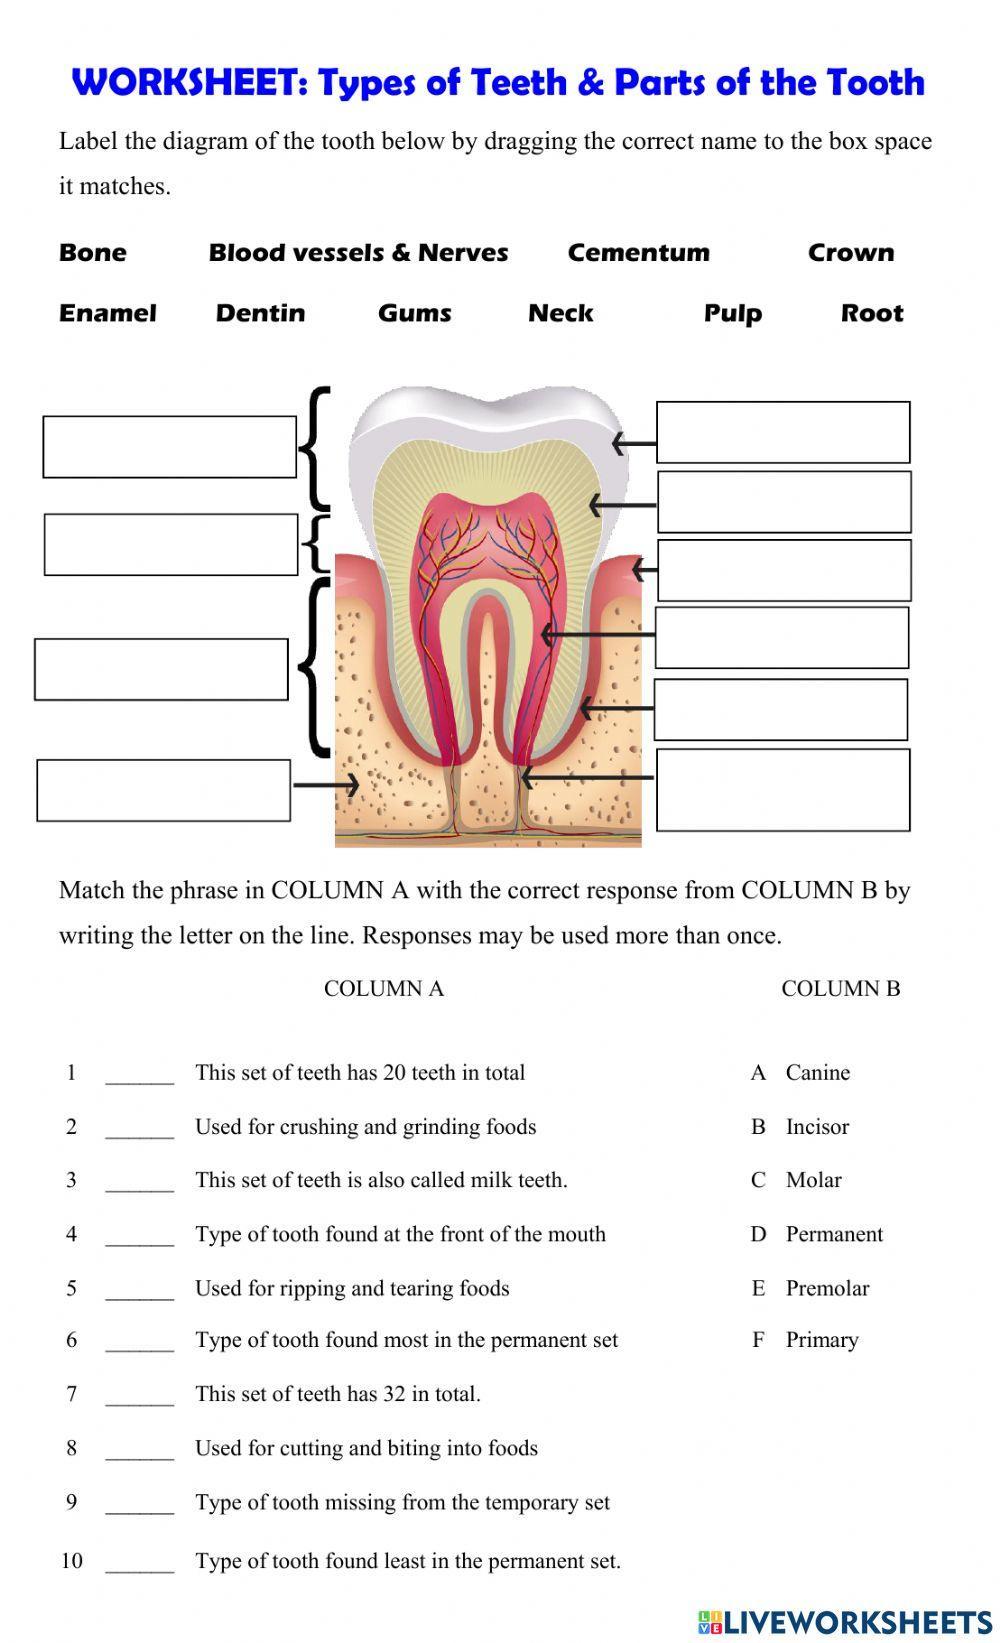 Types of Teeth & Parts of the Tooth